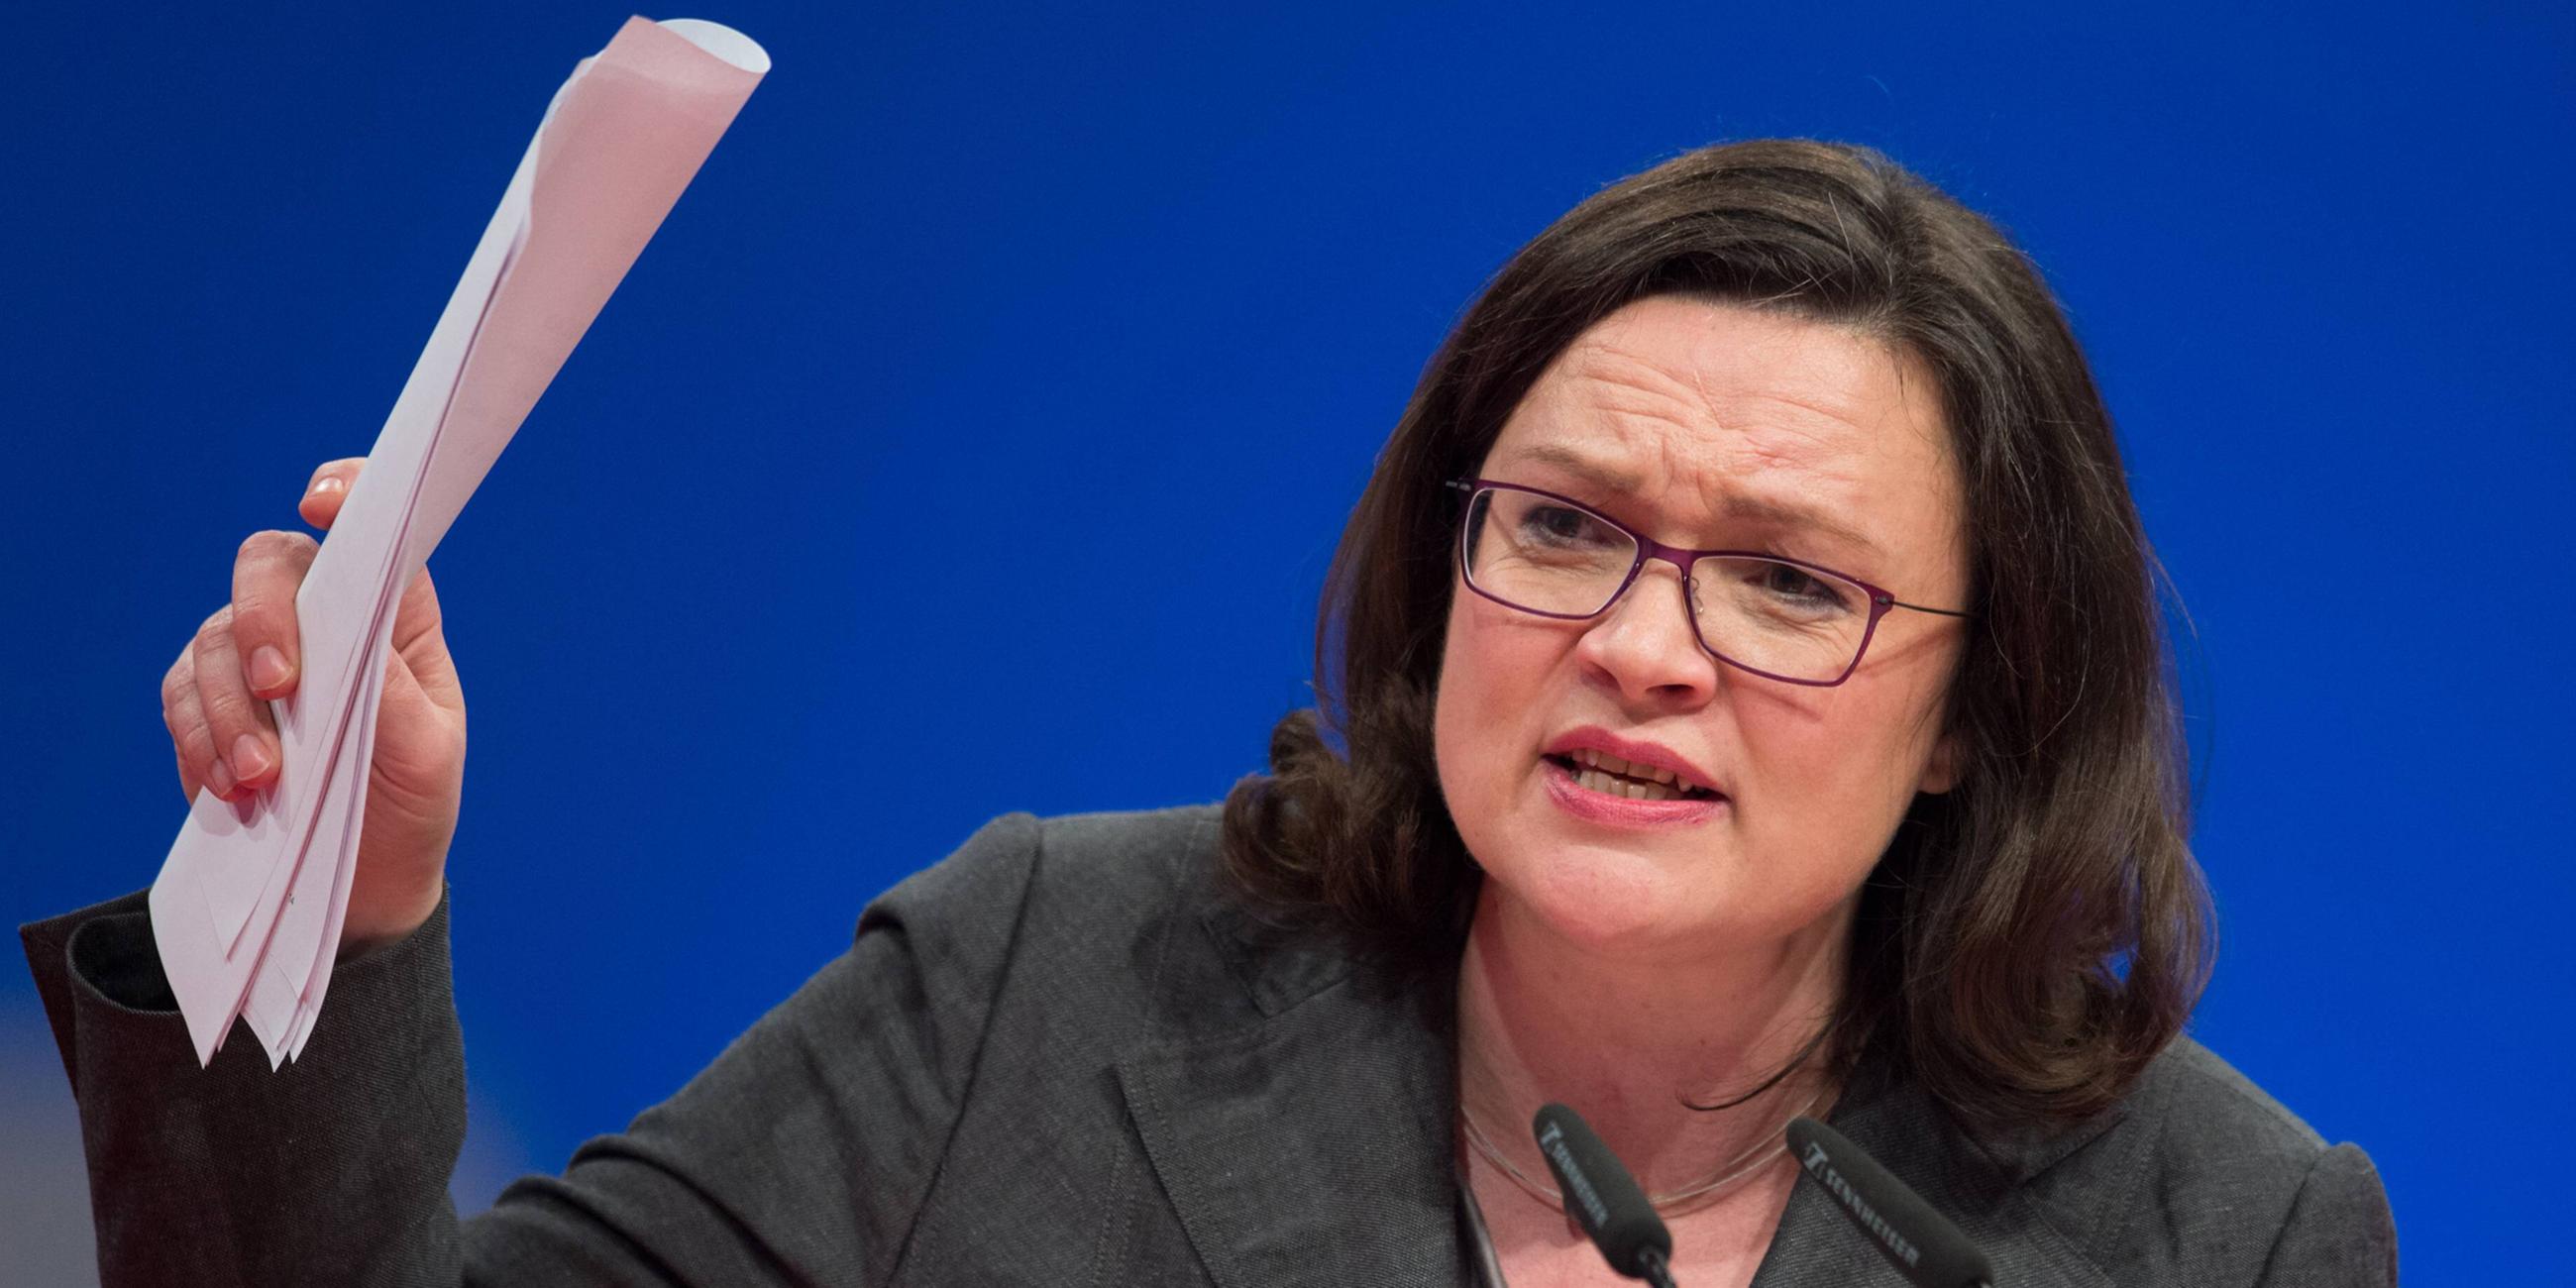 Archiv: Andrea Nahles am 07.12.2017 in Berlin